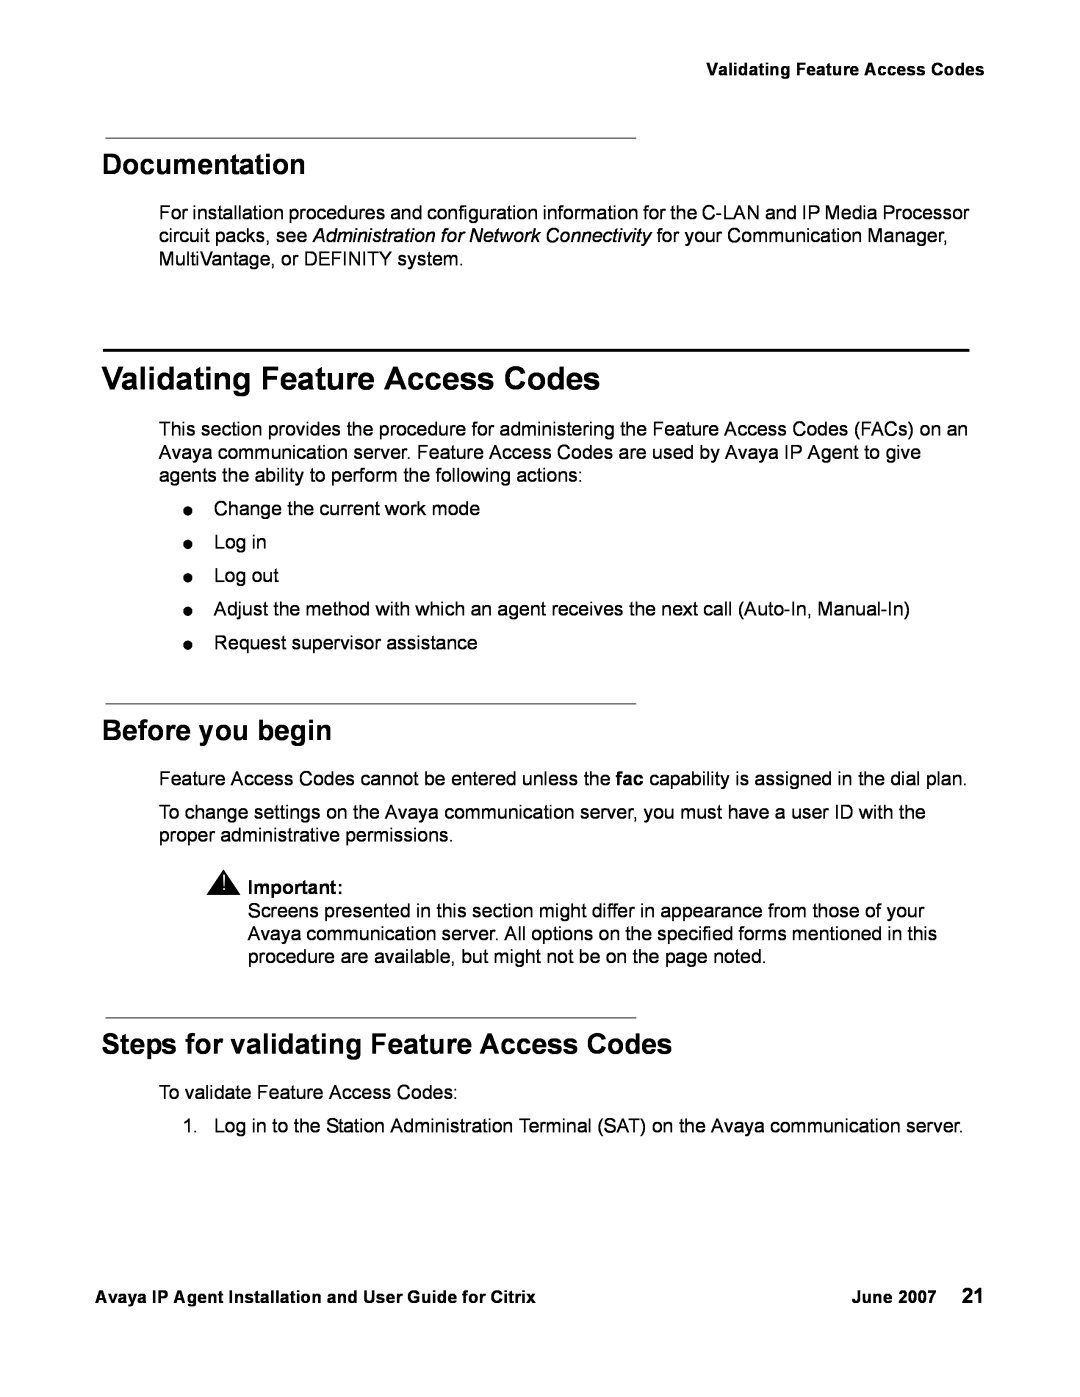 Avaya 7 manual Validating Feature Access Codes, Documentation, Before you begin, Steps for validating Feature Access Codes 